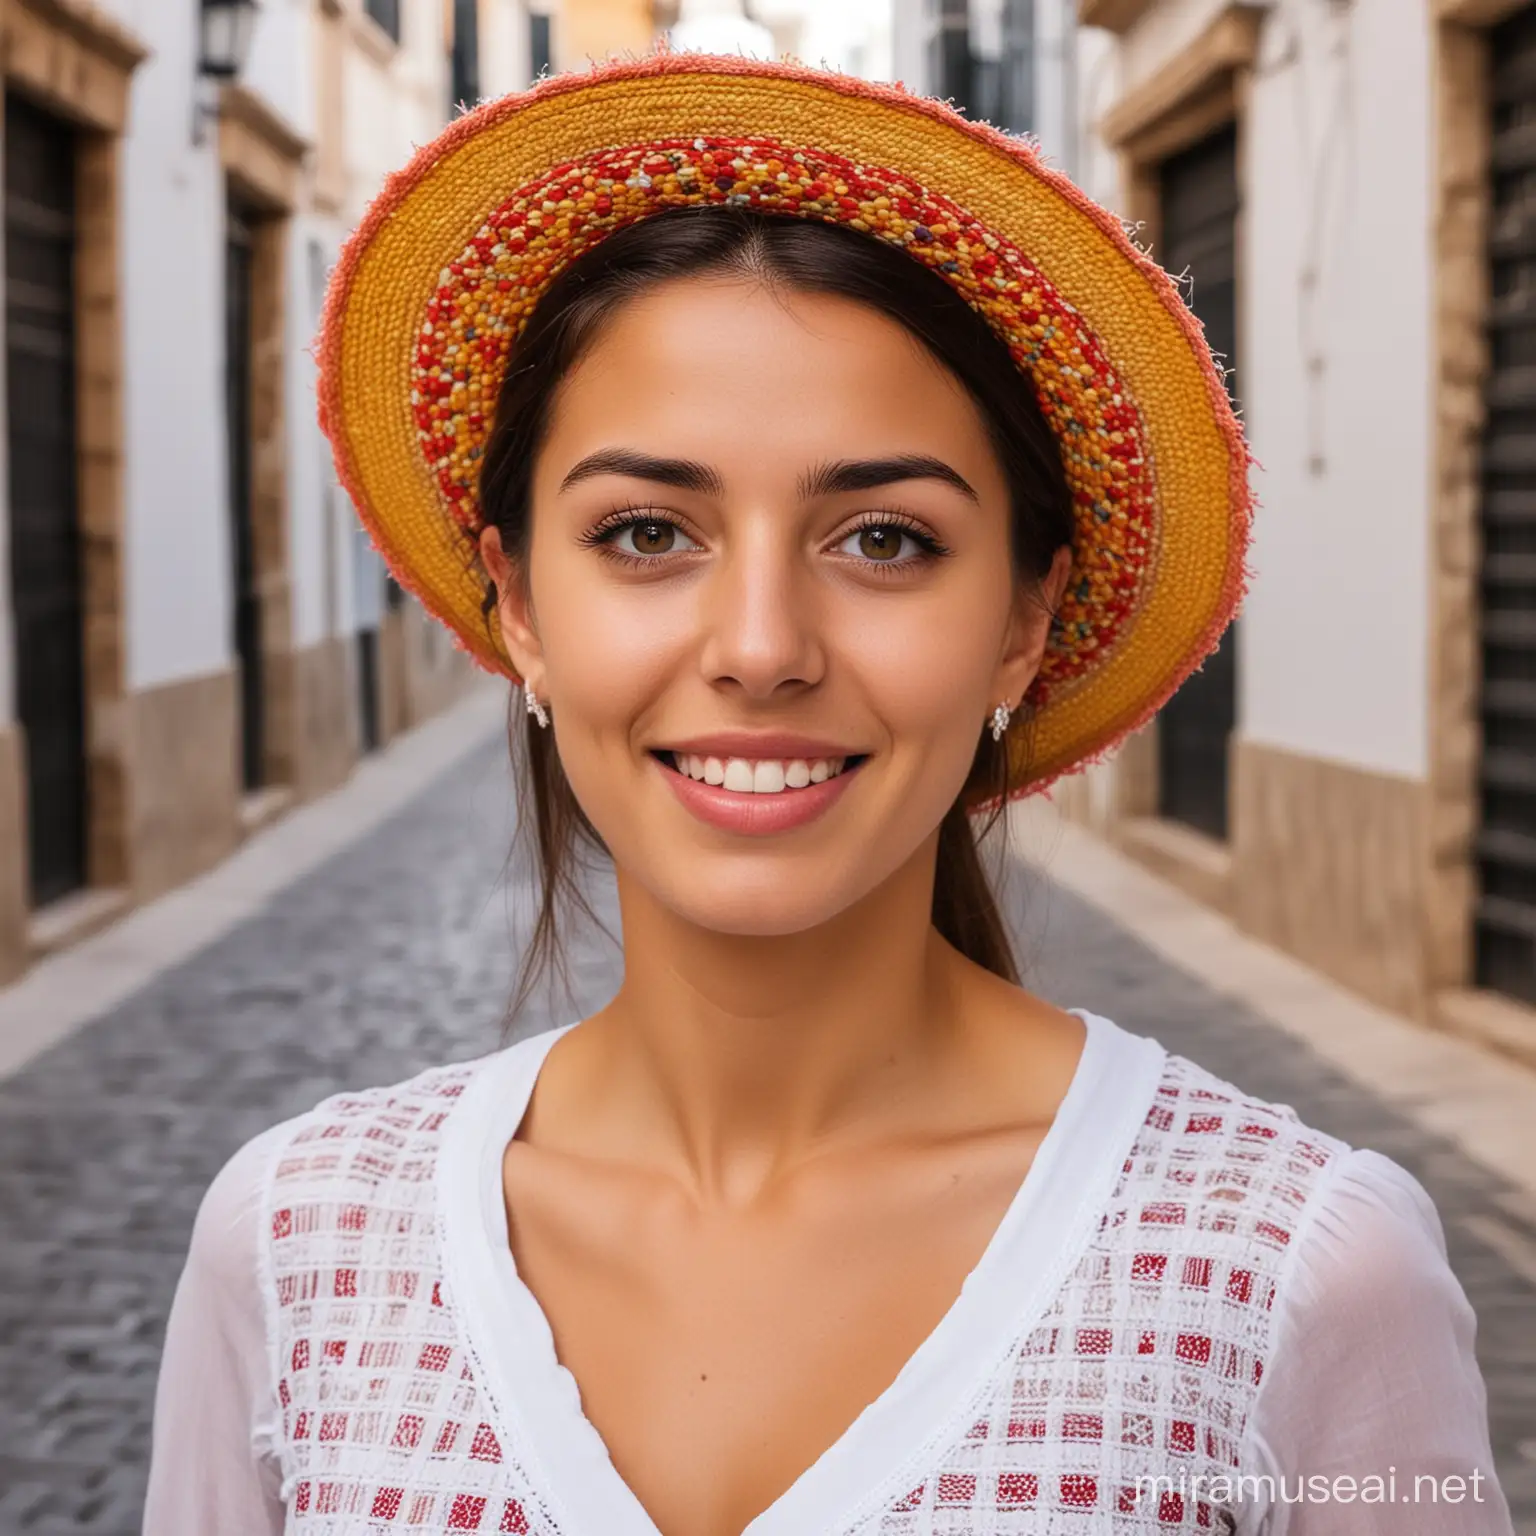 Vibrant Portrait of a Typical Malaga Girl